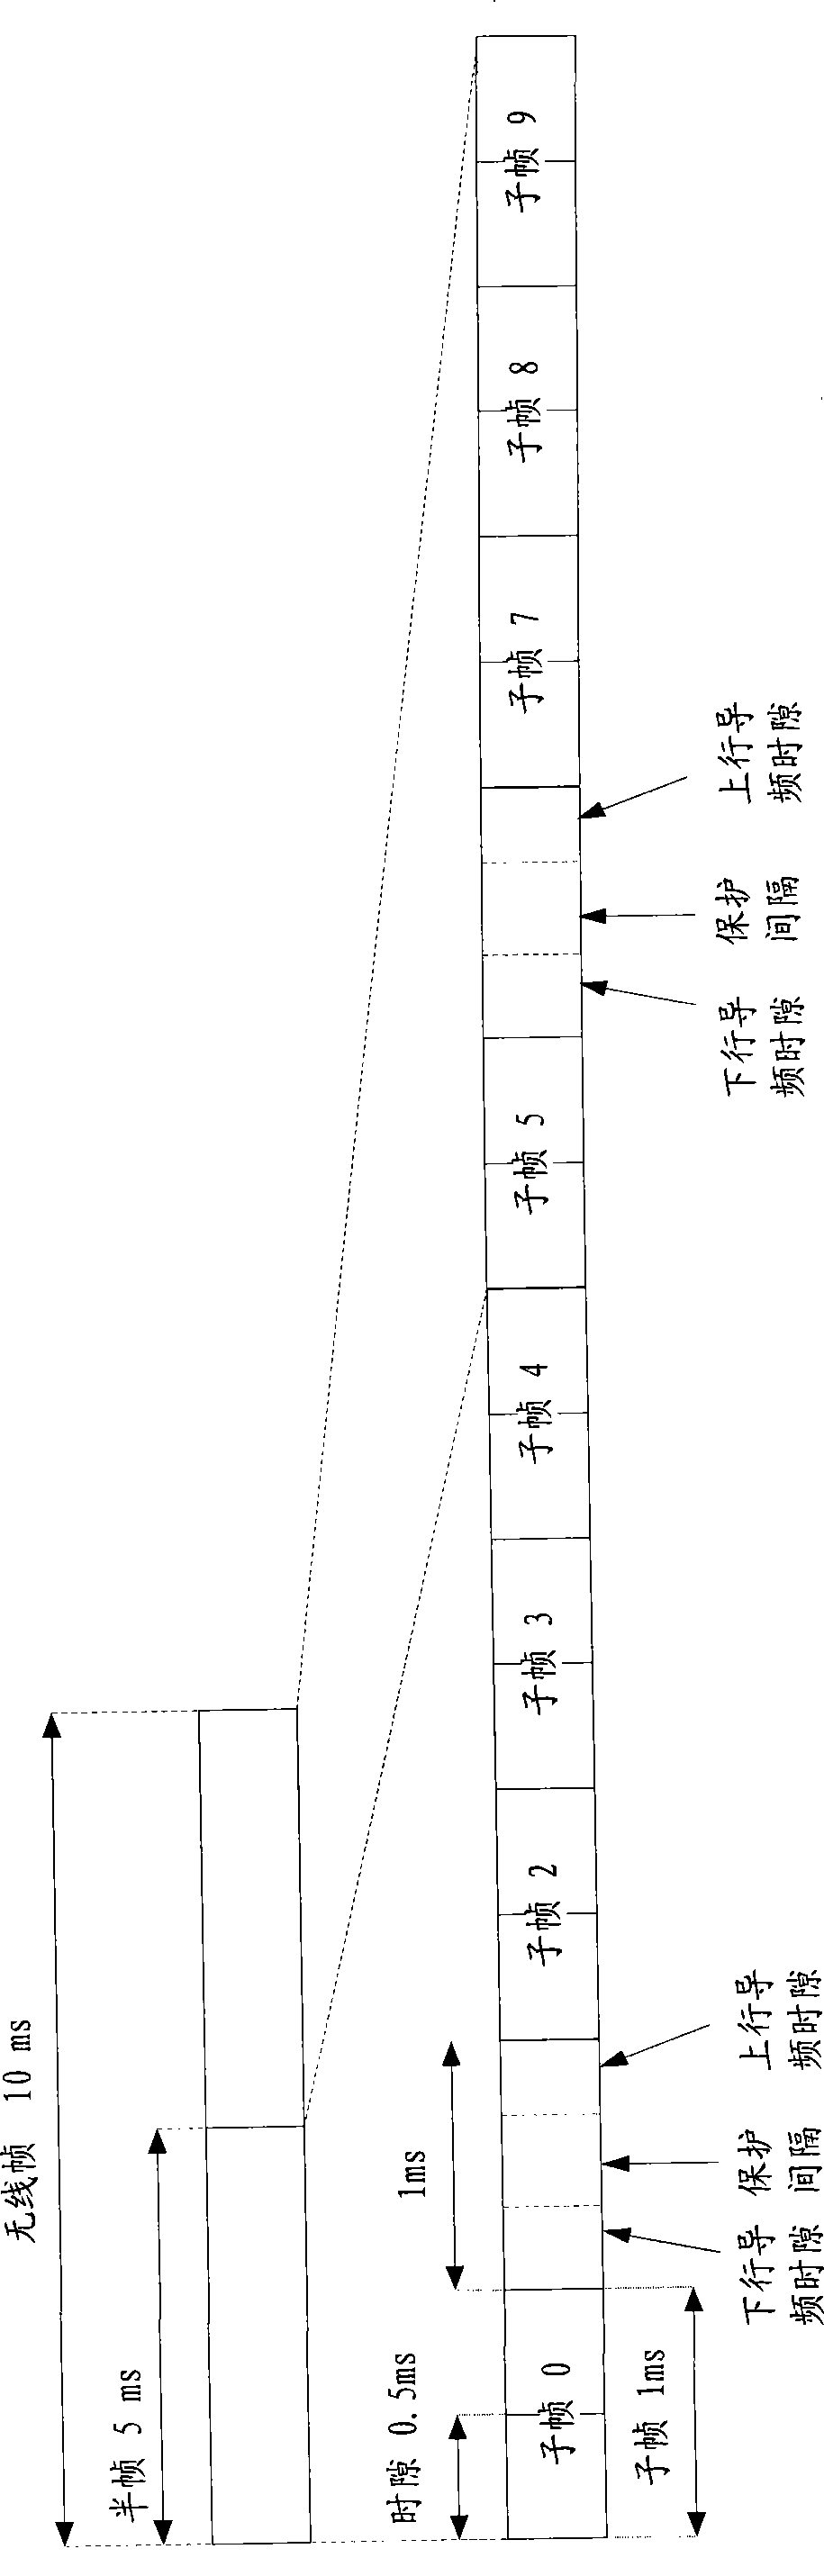 Method for detecting cyclic prefix length in time division duplex system